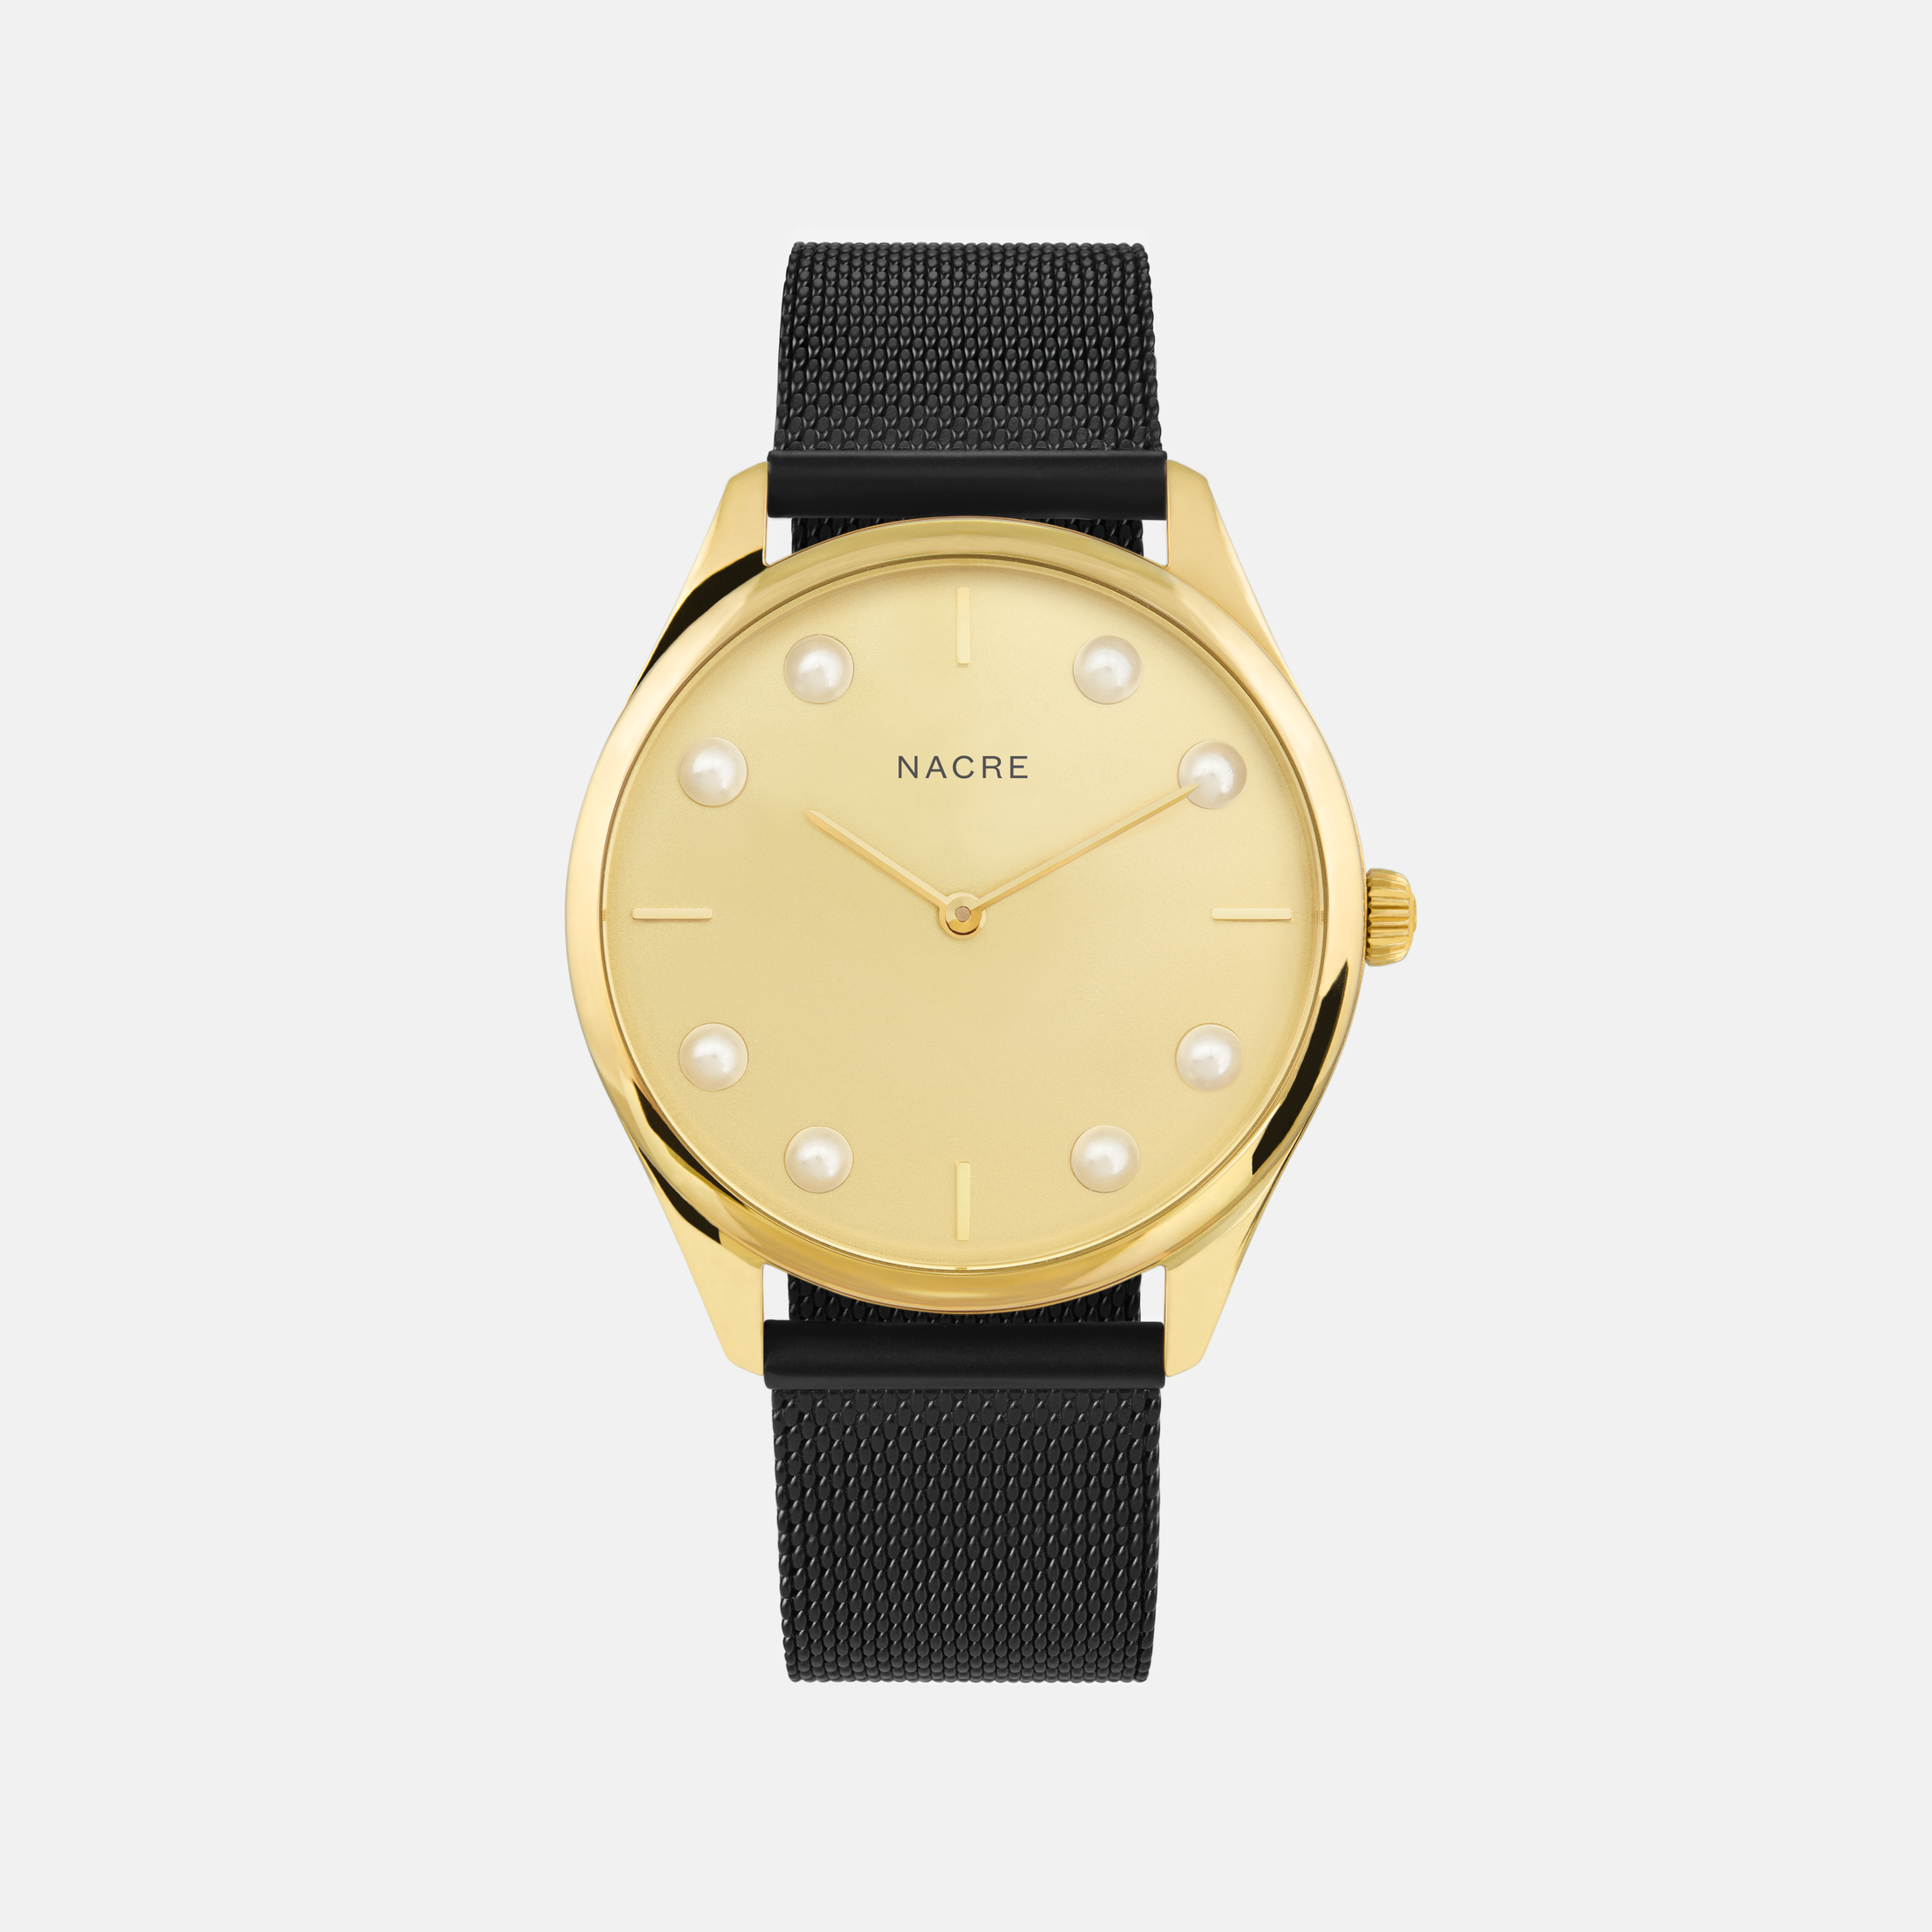 Lune 8 - Gold - Black Leather